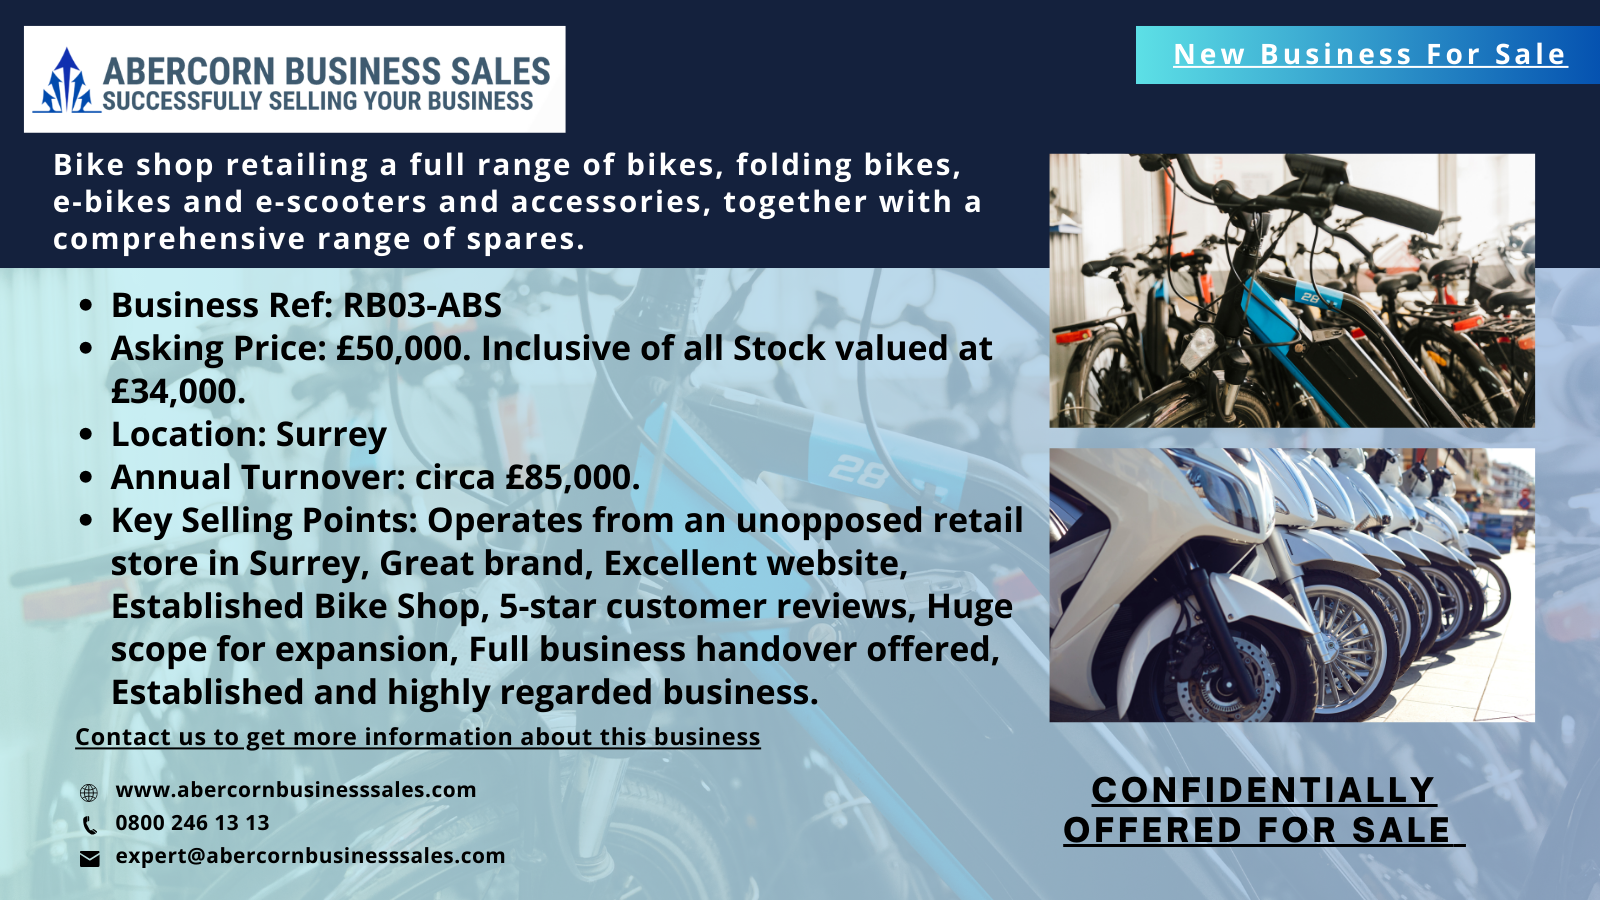 RB03-ABS - Bike shop retailing a full range of bikes, folding bikes, e-bikes and e-scooters and accessories, together with a comprehensive range of spares